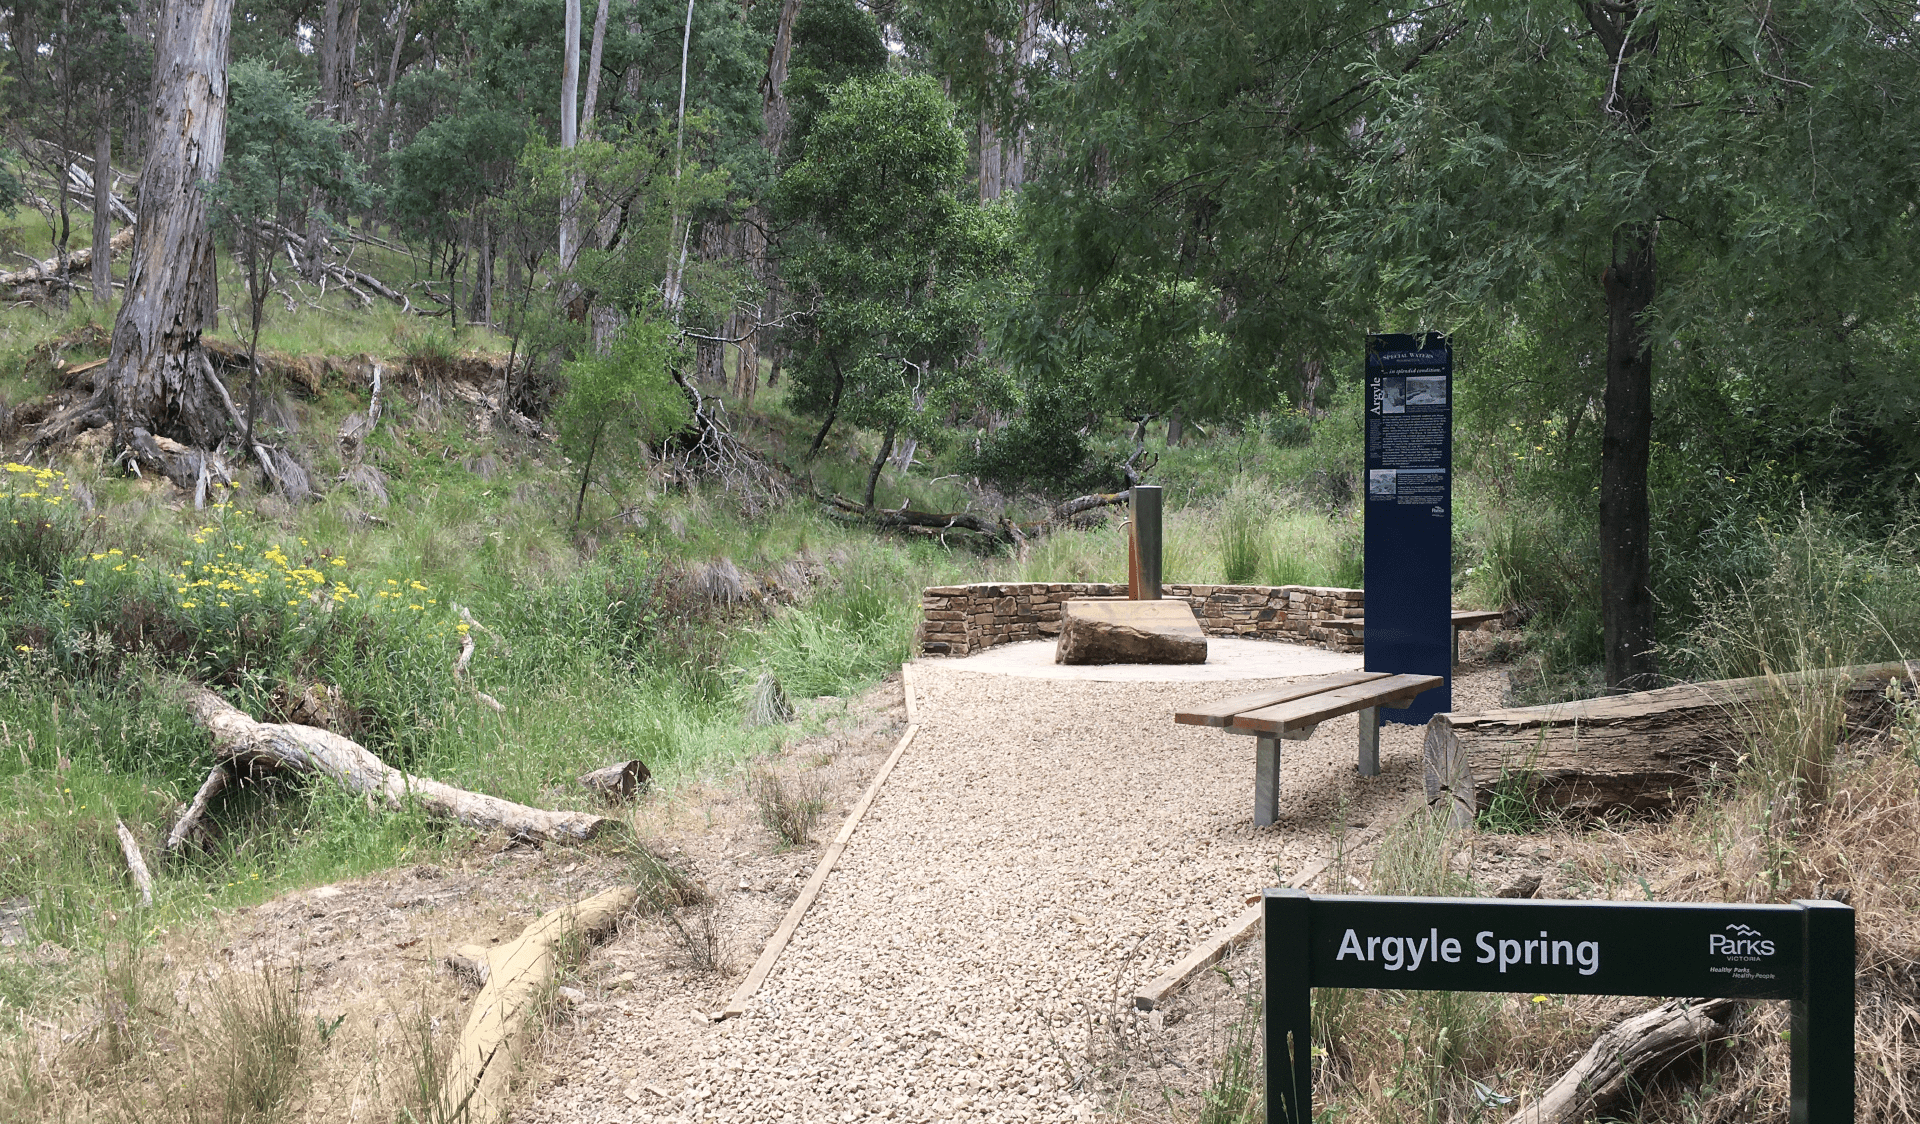 Mineral Springs such as Argyle Spring are an unique feature of Hepburn Regional Park